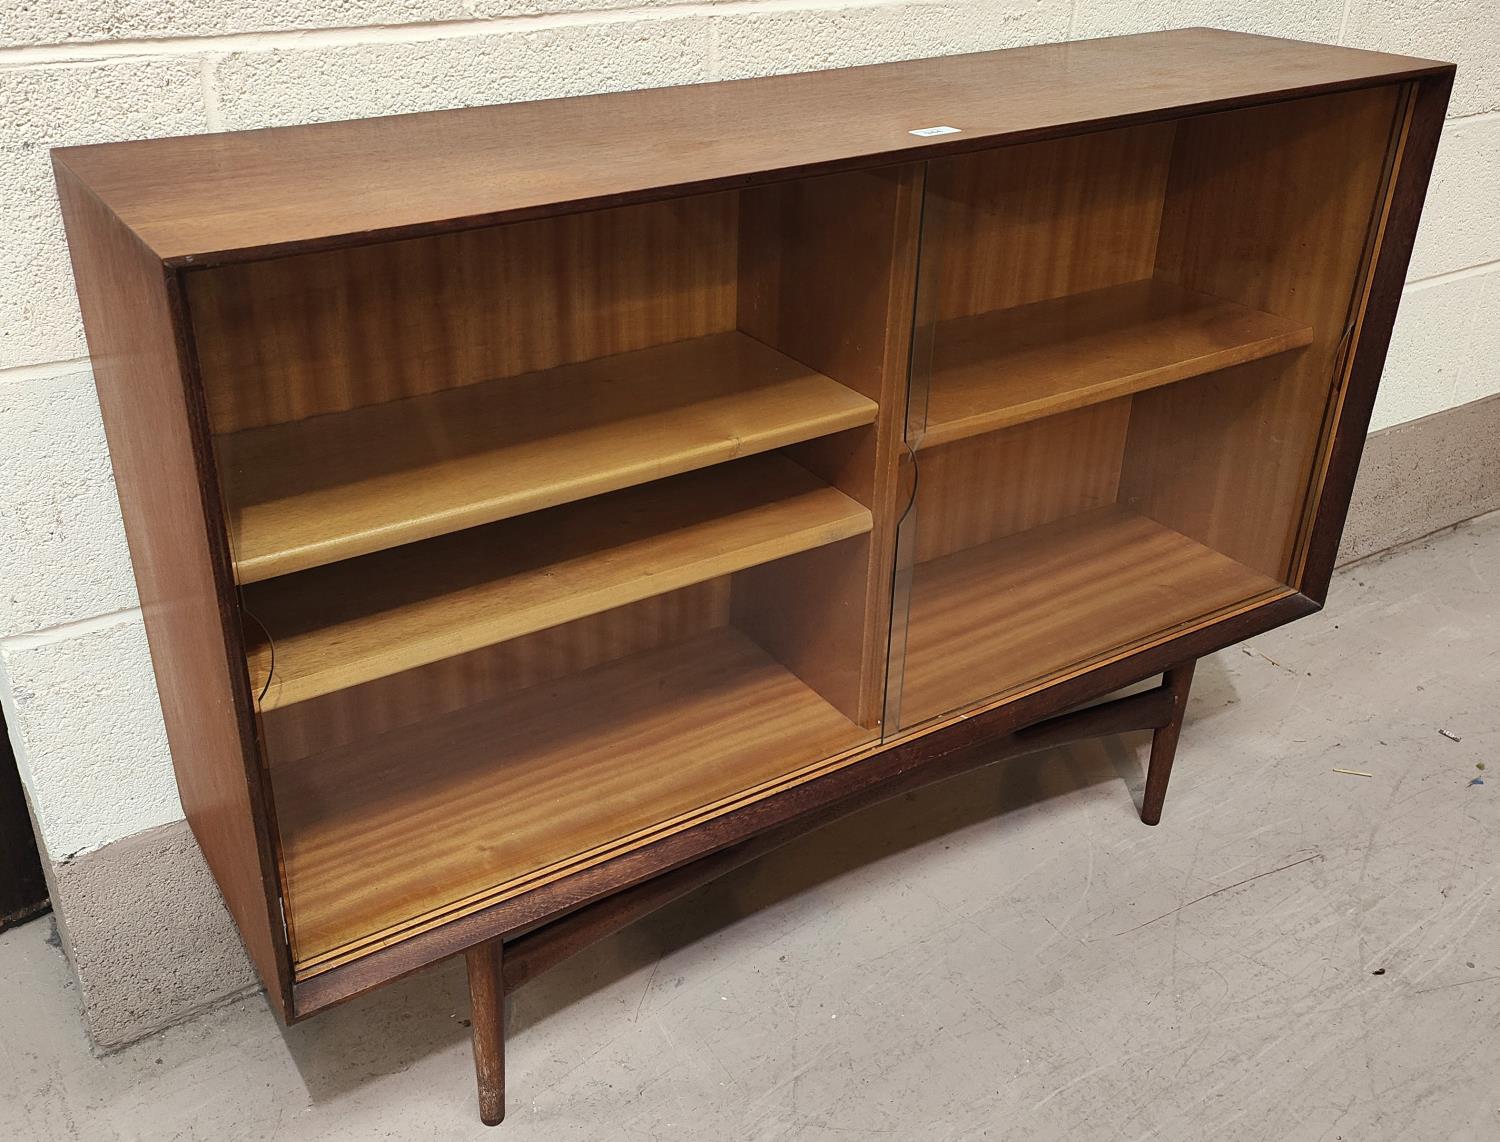 A 1960's G-Plan style teak side cabinet by Dalescraft enclosed by 2 sliding doors